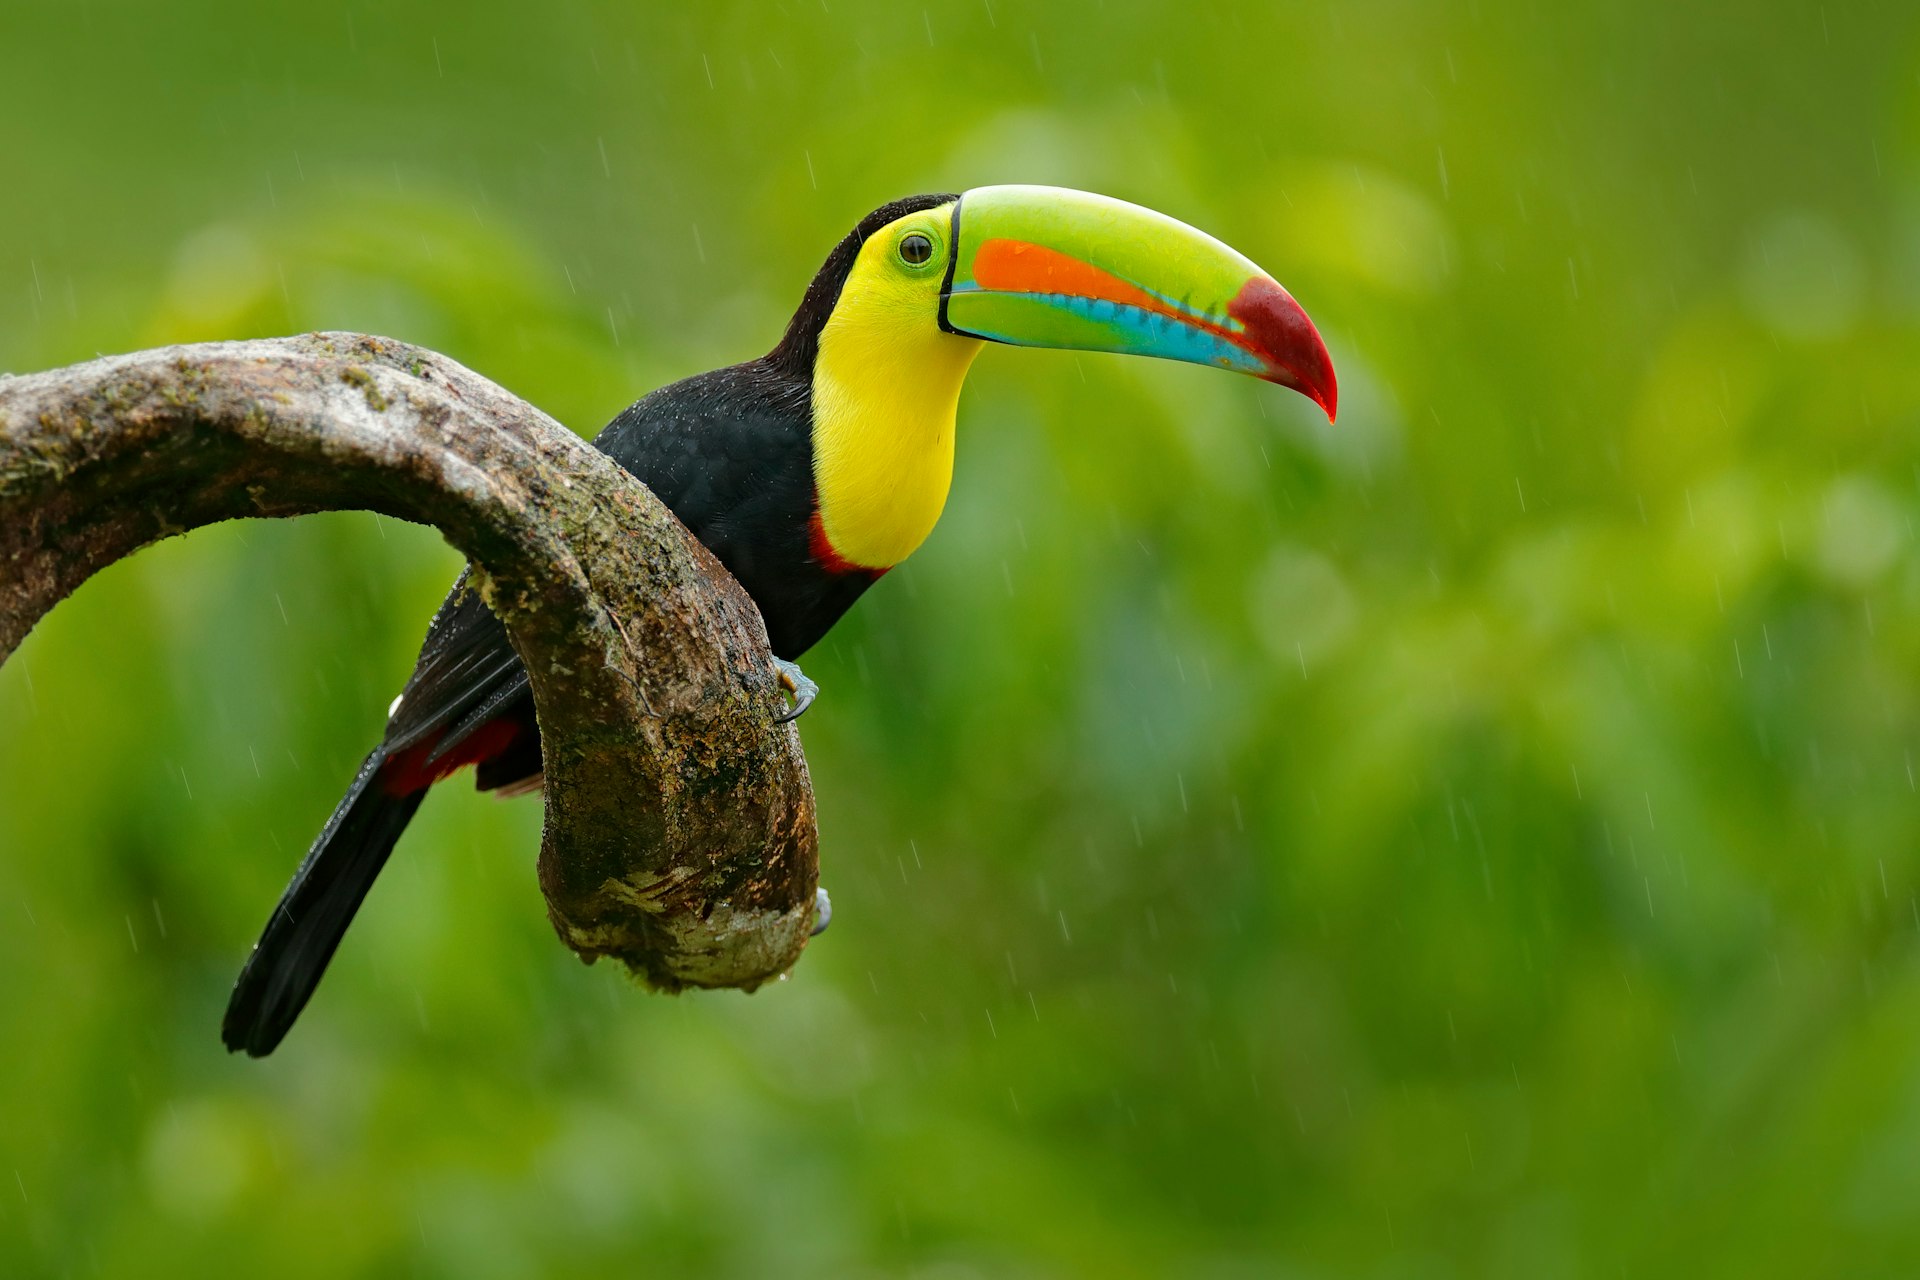 A bird with a brightly colored beak sits on a branch in rainforest